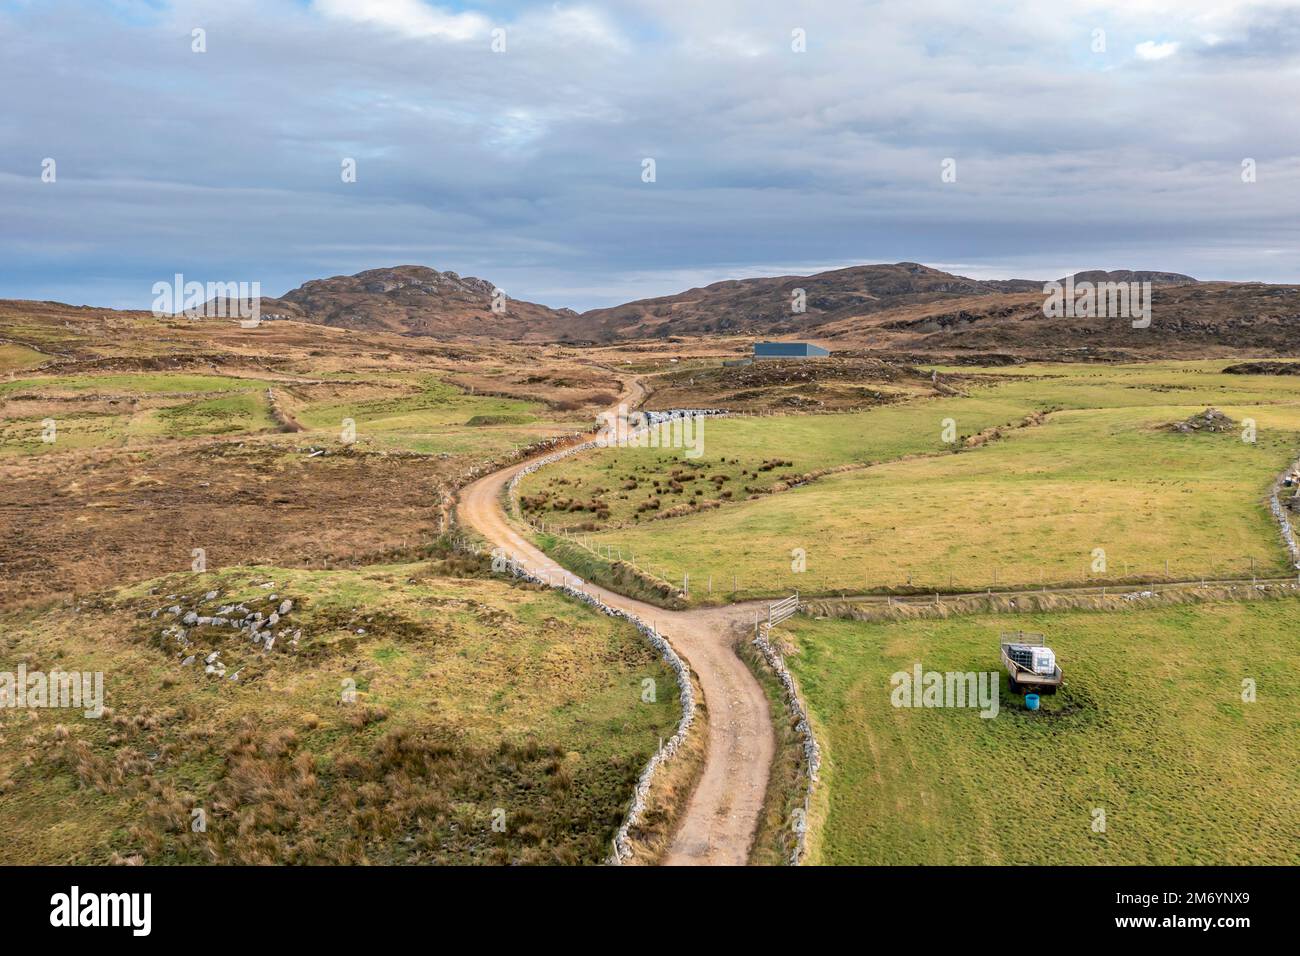 Aerial view of the track to Agnish Lough by Maghery, Dungloe - County Donegal - Ireland Stock Photo